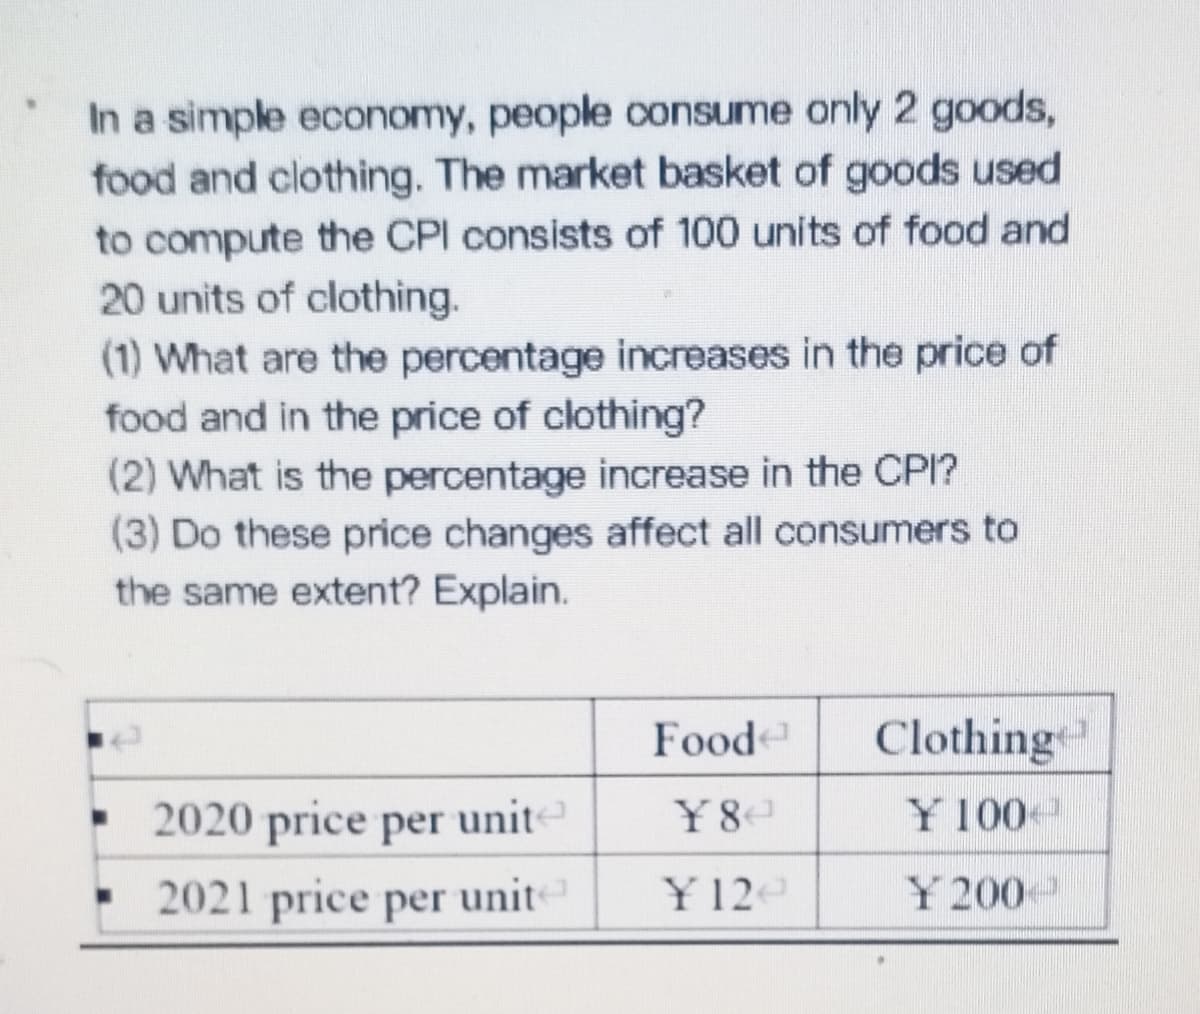 In a simple economy, people consume only 2 goods,
food and clothing. The market basket of goods used
to compute the CPI consists of 100 units of food and
20 units of clothing.
(1) What are the percentage increases in the price of
food and in the price of clothing?
(2) What is the percentage increase in the CPI?
(3) Do these price changes affect all consumers to
the same extent? Explain.
Food
Clothing
2020 price per unit
unite
¥8
Y 100
2021 price per unit
Y 12e
Y 200
